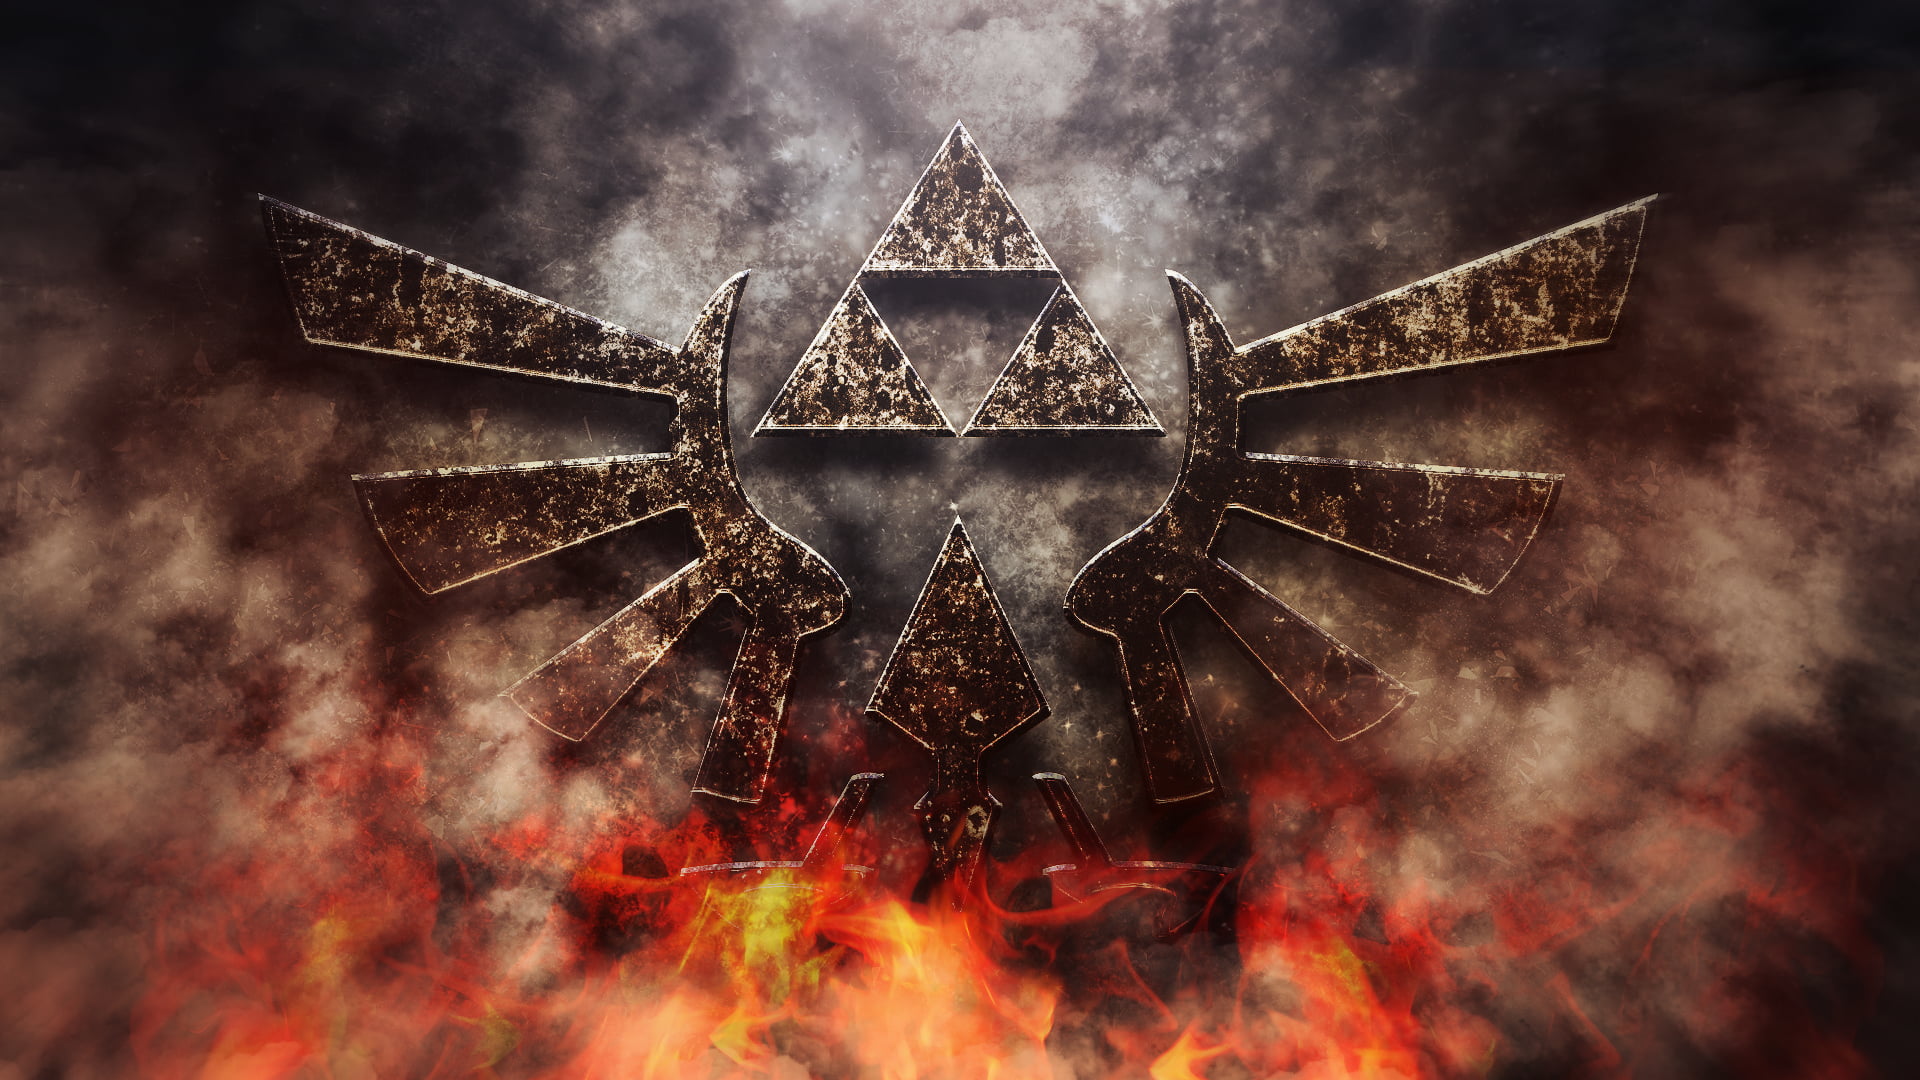 Triforce The Legend Of Zelda Logo With Fire Illustration Hd Images, Photos, Reviews